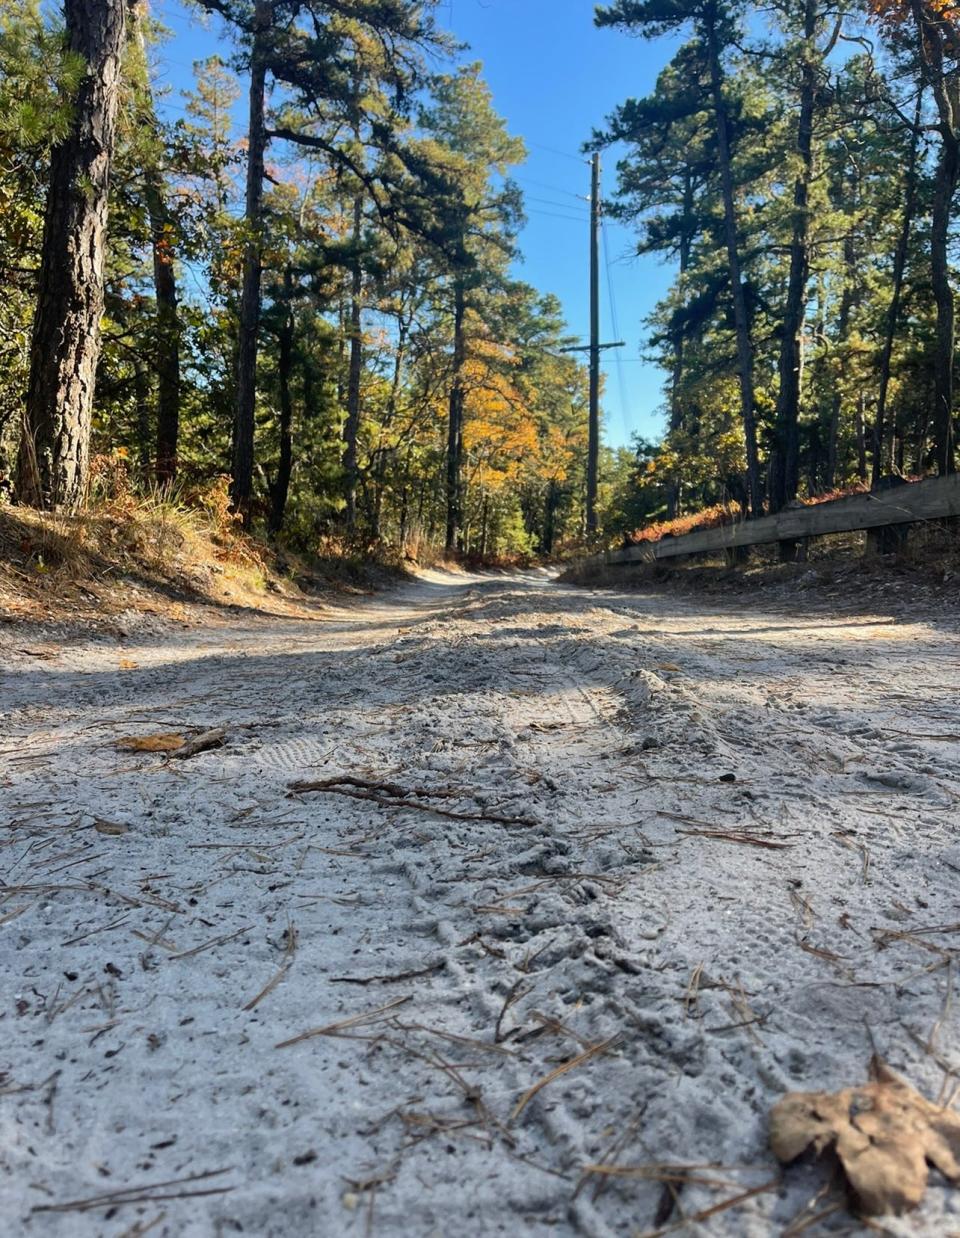 A sand road leading to the Apple Pie Hill fire tower, which is the highest point in the Pine Barrens. The tower is not open to visitors.